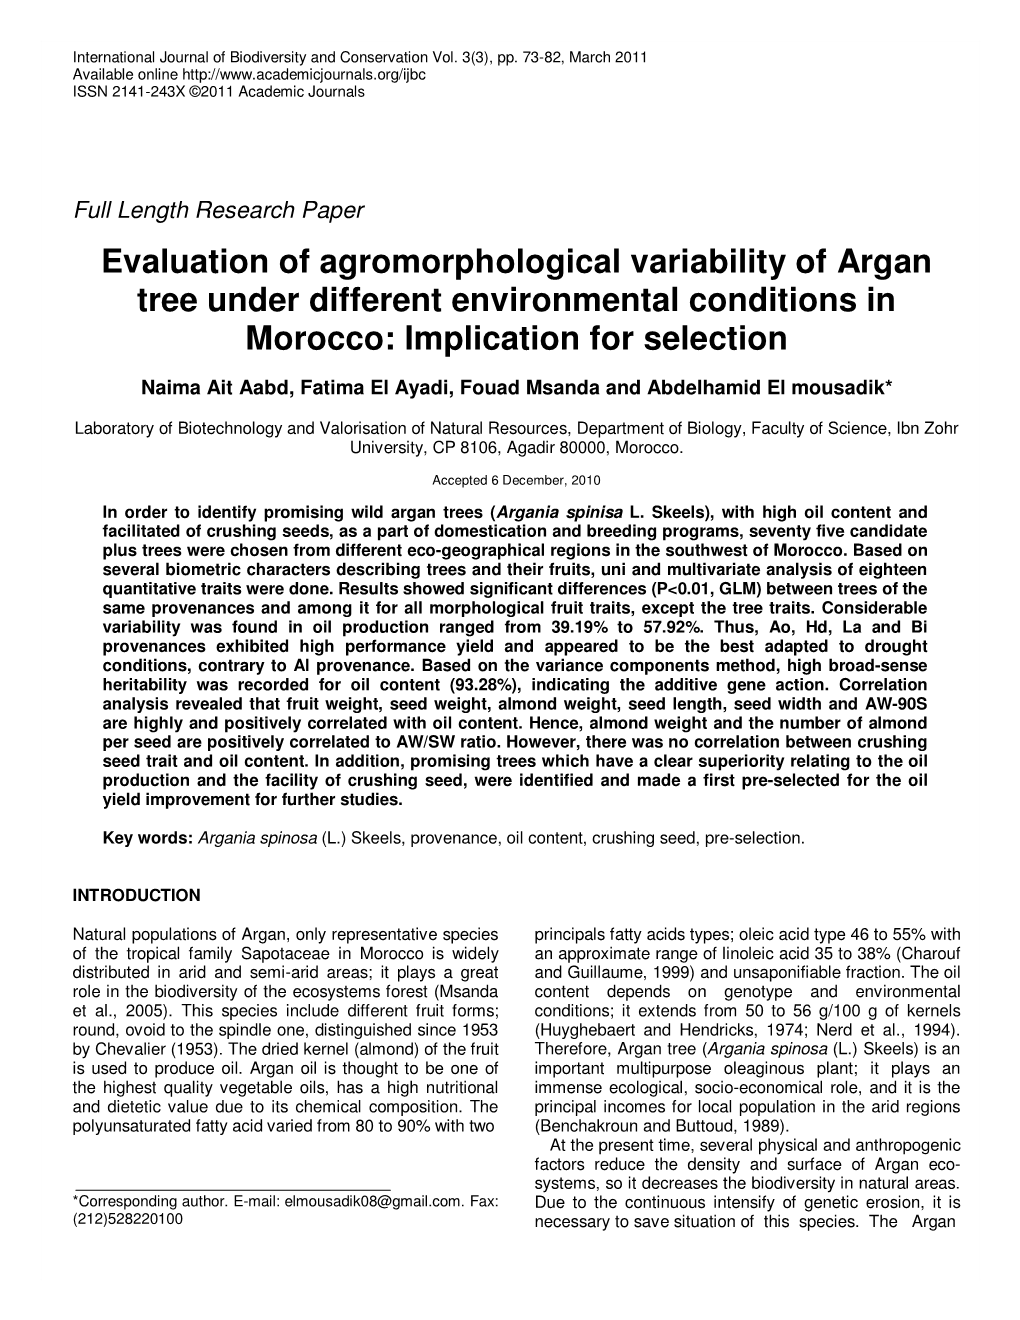 Evaluation of Agromorphological Variability of Argan Tree Under Different Environmental Conditions in Morocco: Implication for Selection